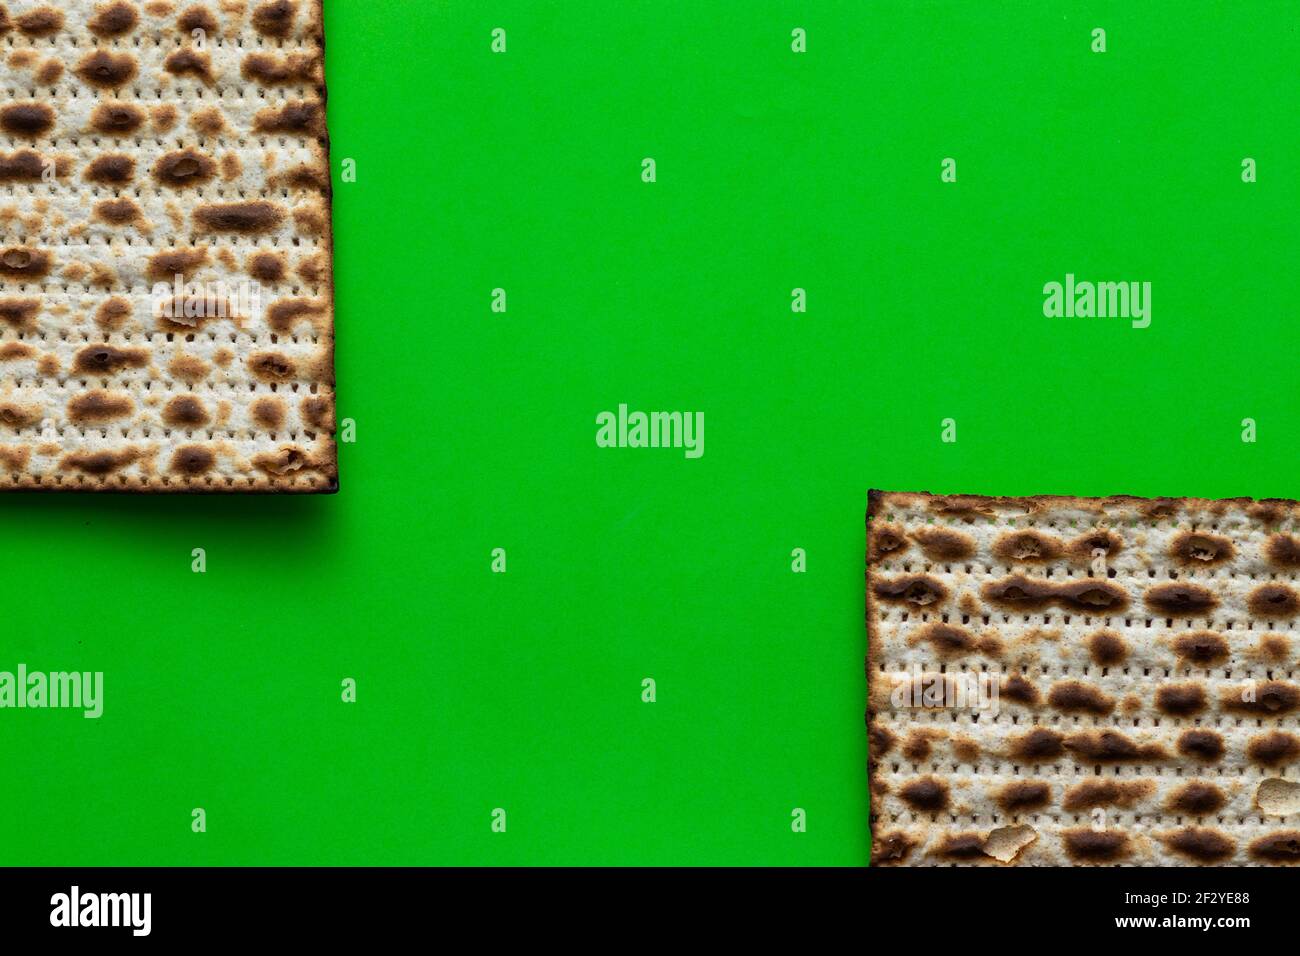 A close-up of two matzahs - bread for the Jewish Passover, on a green background Stock Photo